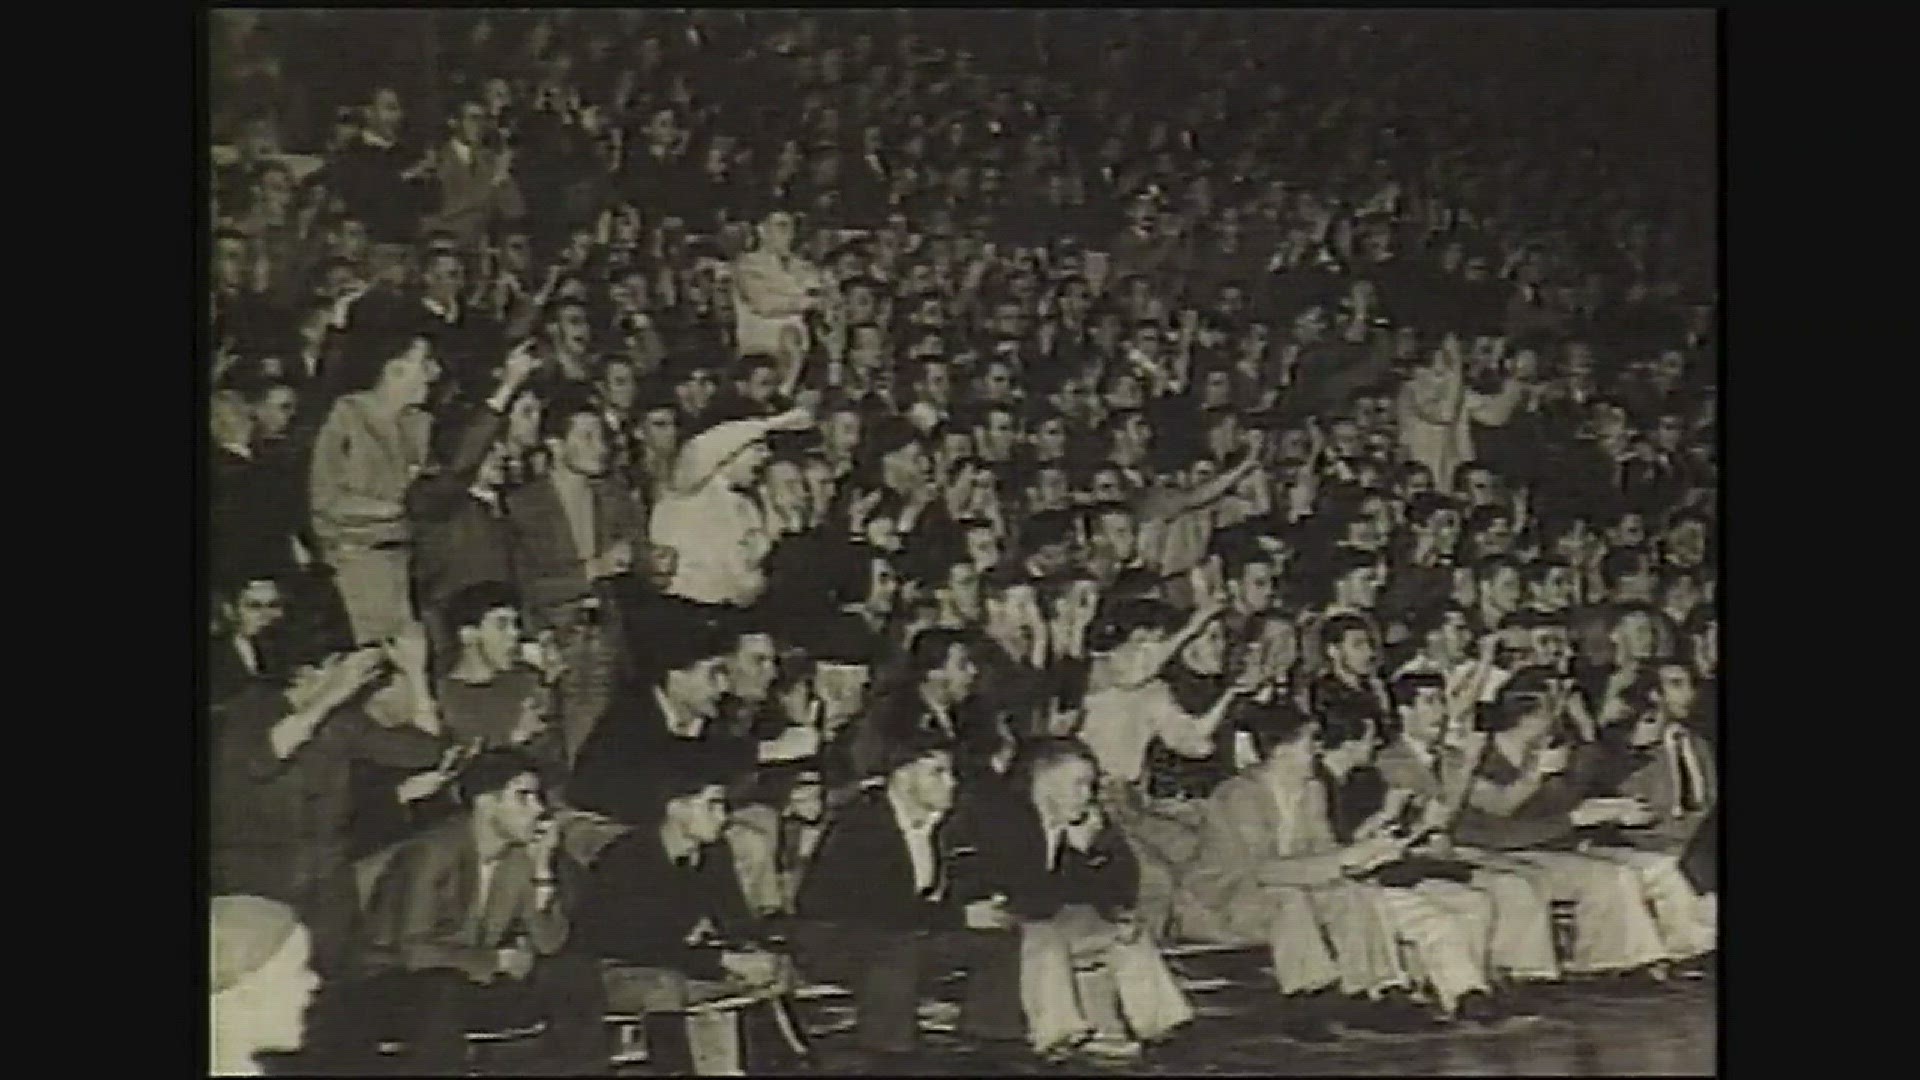 A KGW video package from 2007 about the 1939 Oregon Webfoots men's basketball team, the last Oregon squad to make the Final Four. In 1939, the Webfoots won it all, beating Ohio State 46-33. This package includes interviews with two members of that team, f